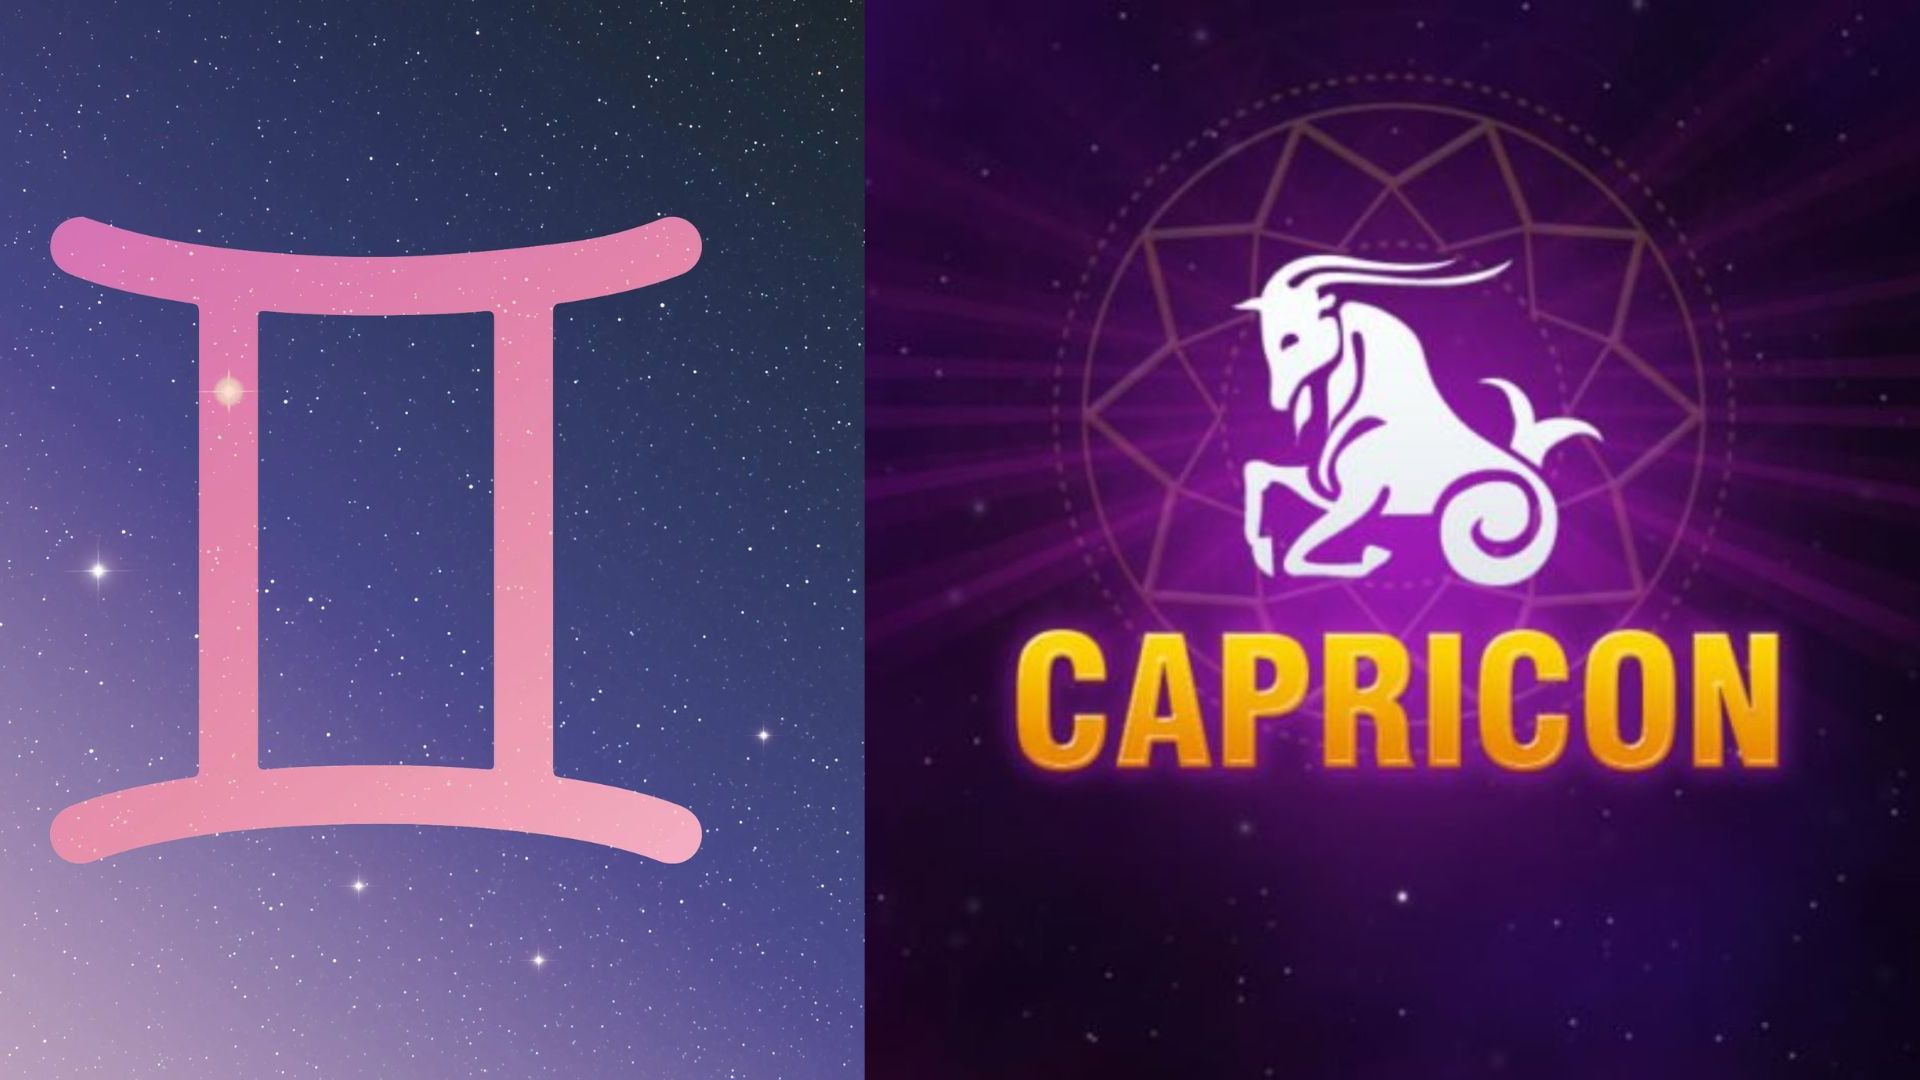 Capricorn And Gemini - A Match Made In Heaven Or A Recipe For Disaster